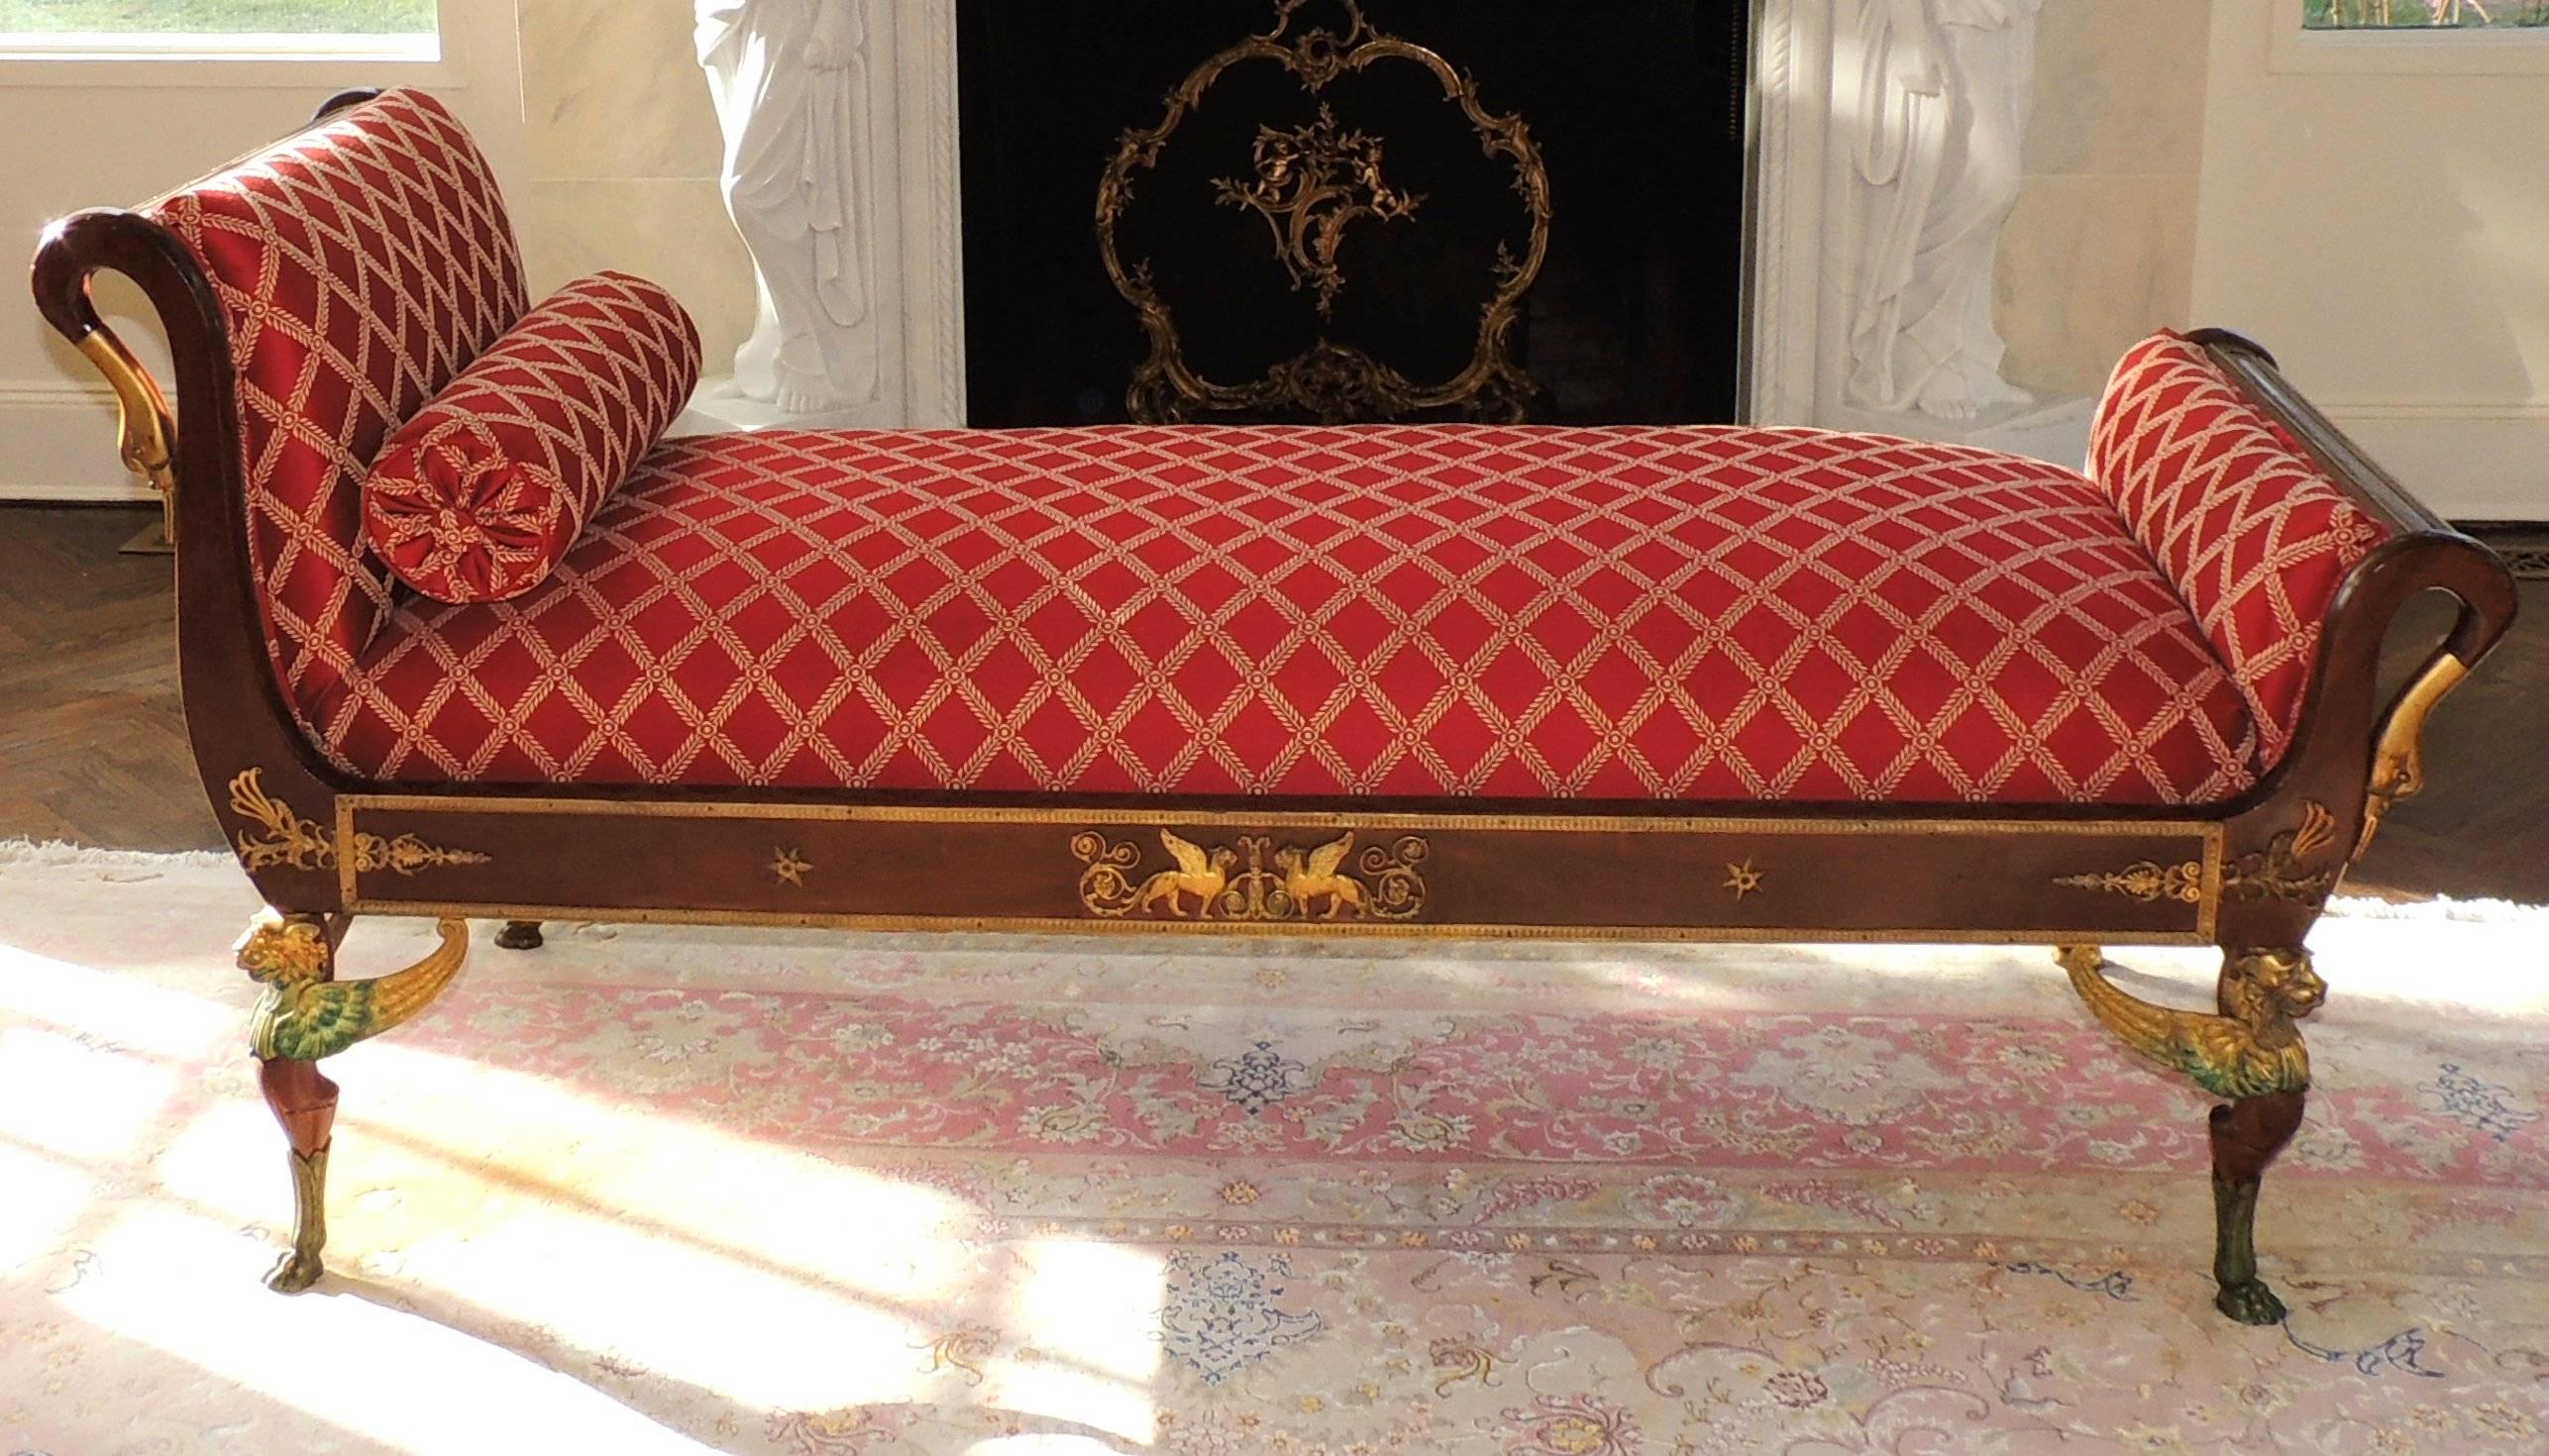 Wonderful parlour chaise longue sofa with gilt bronze ormolu-mounted swan heads on the four corners and winged lions on the four lower corners and decorating the filigree trim around the mahogany.
New upholstery.

Measures: 34